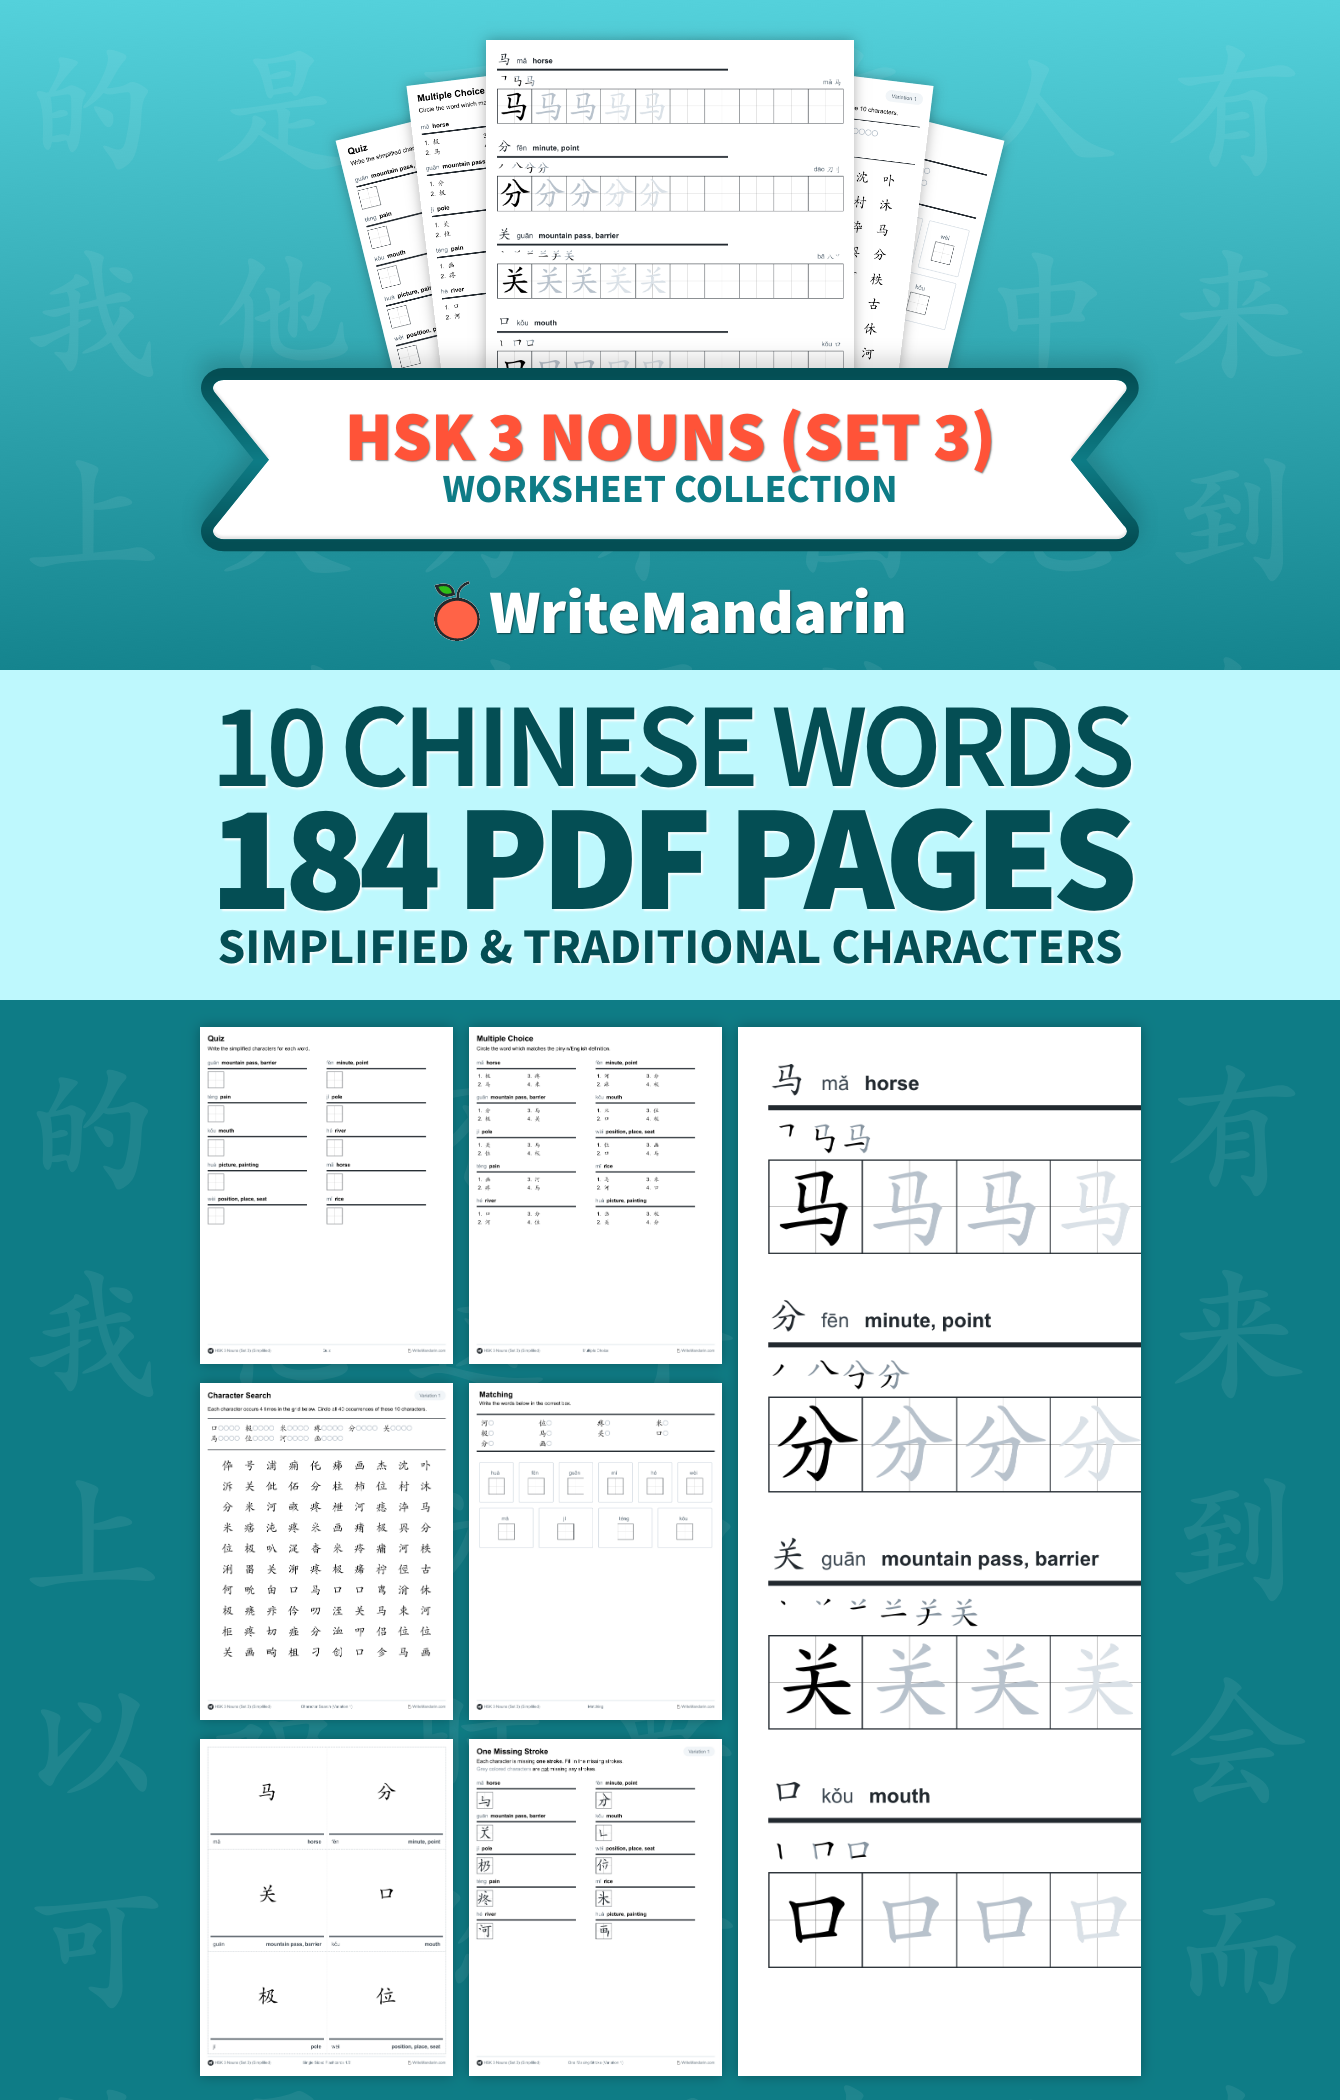 Preview image of HSK 3 Nouns (Set 3) worksheet collection